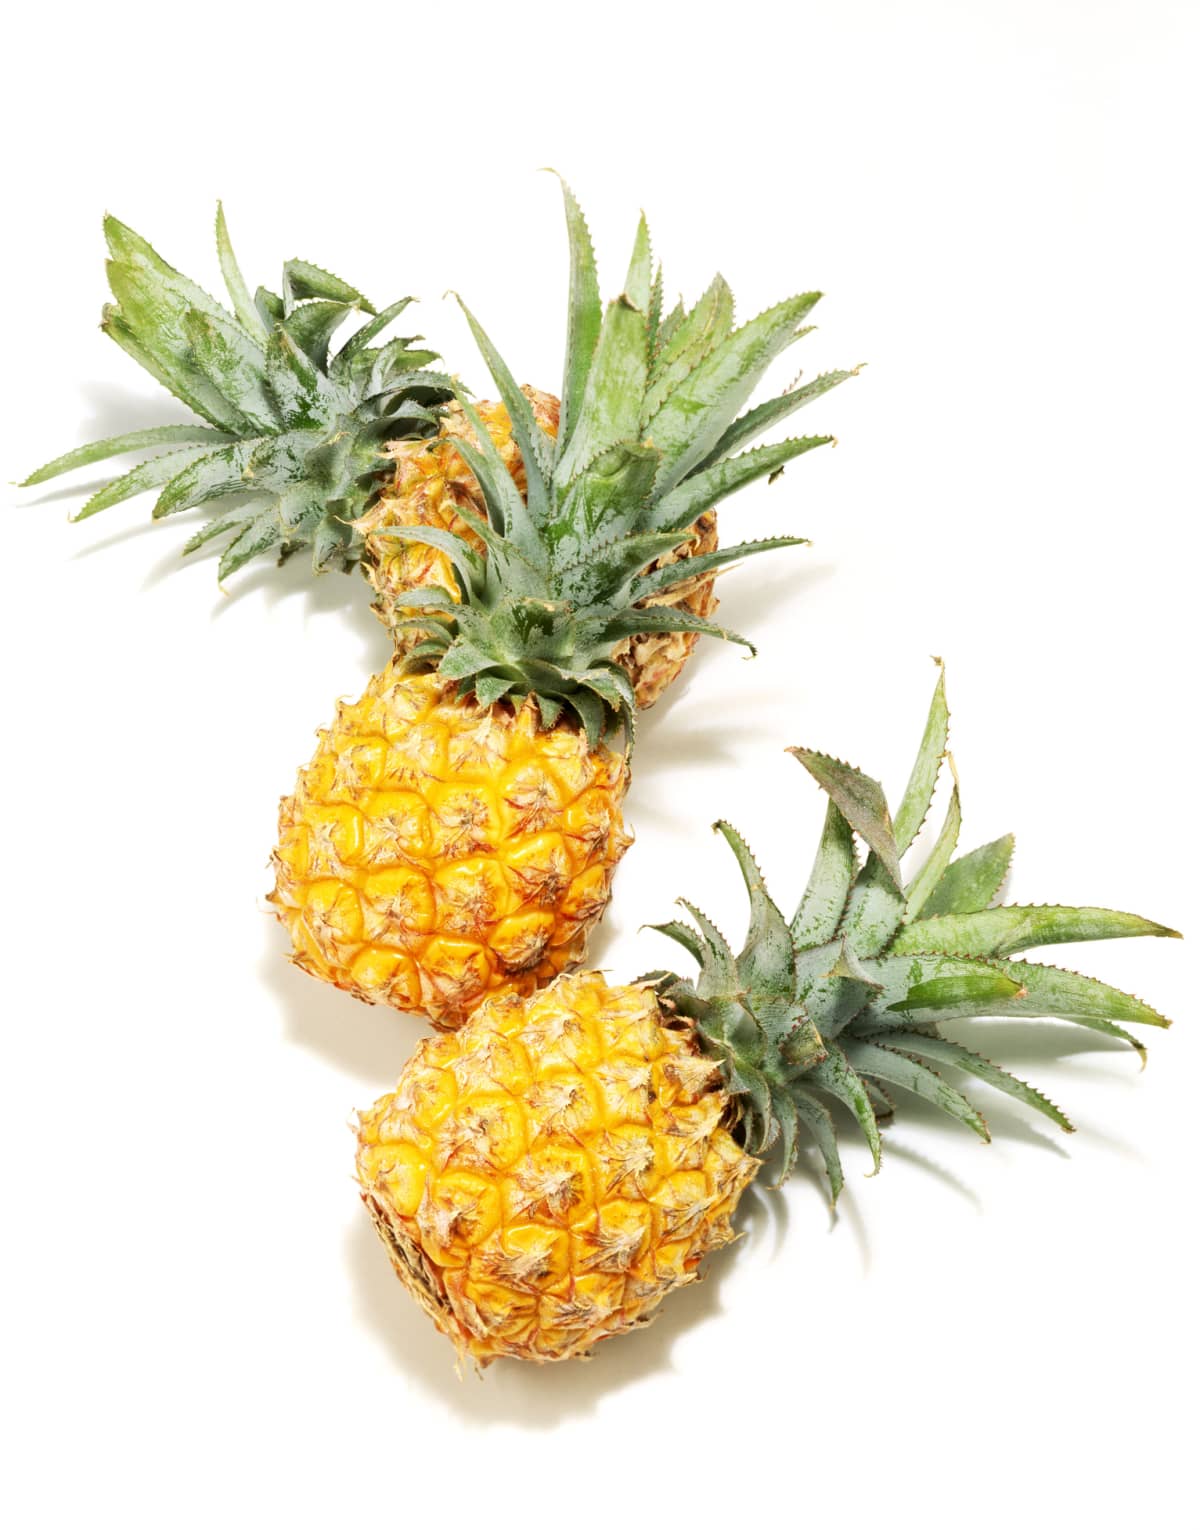 Three pineapples against a white background.